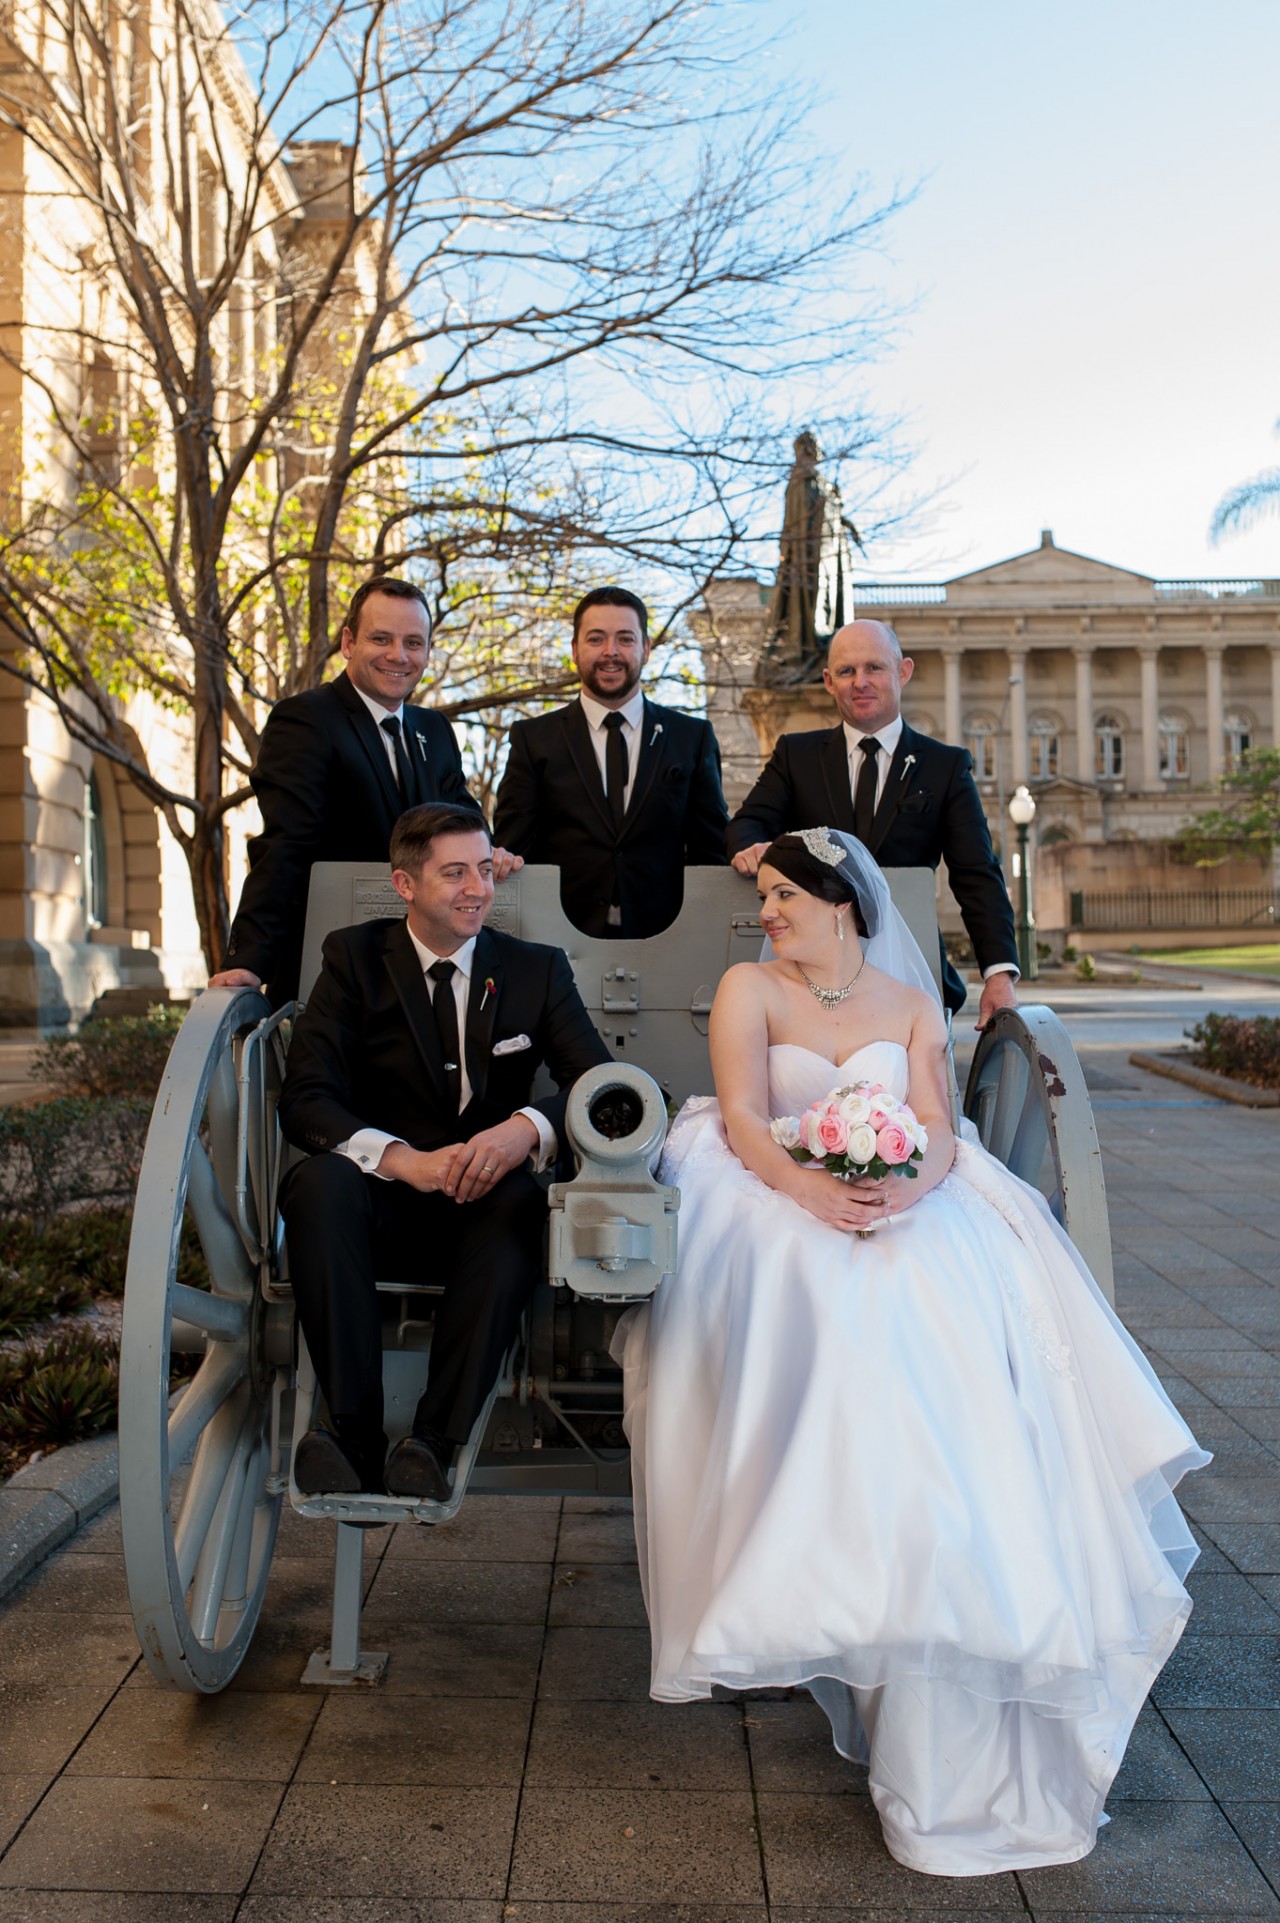 The bridal party sitting on a cannon at the Brisbane Treasury Casino